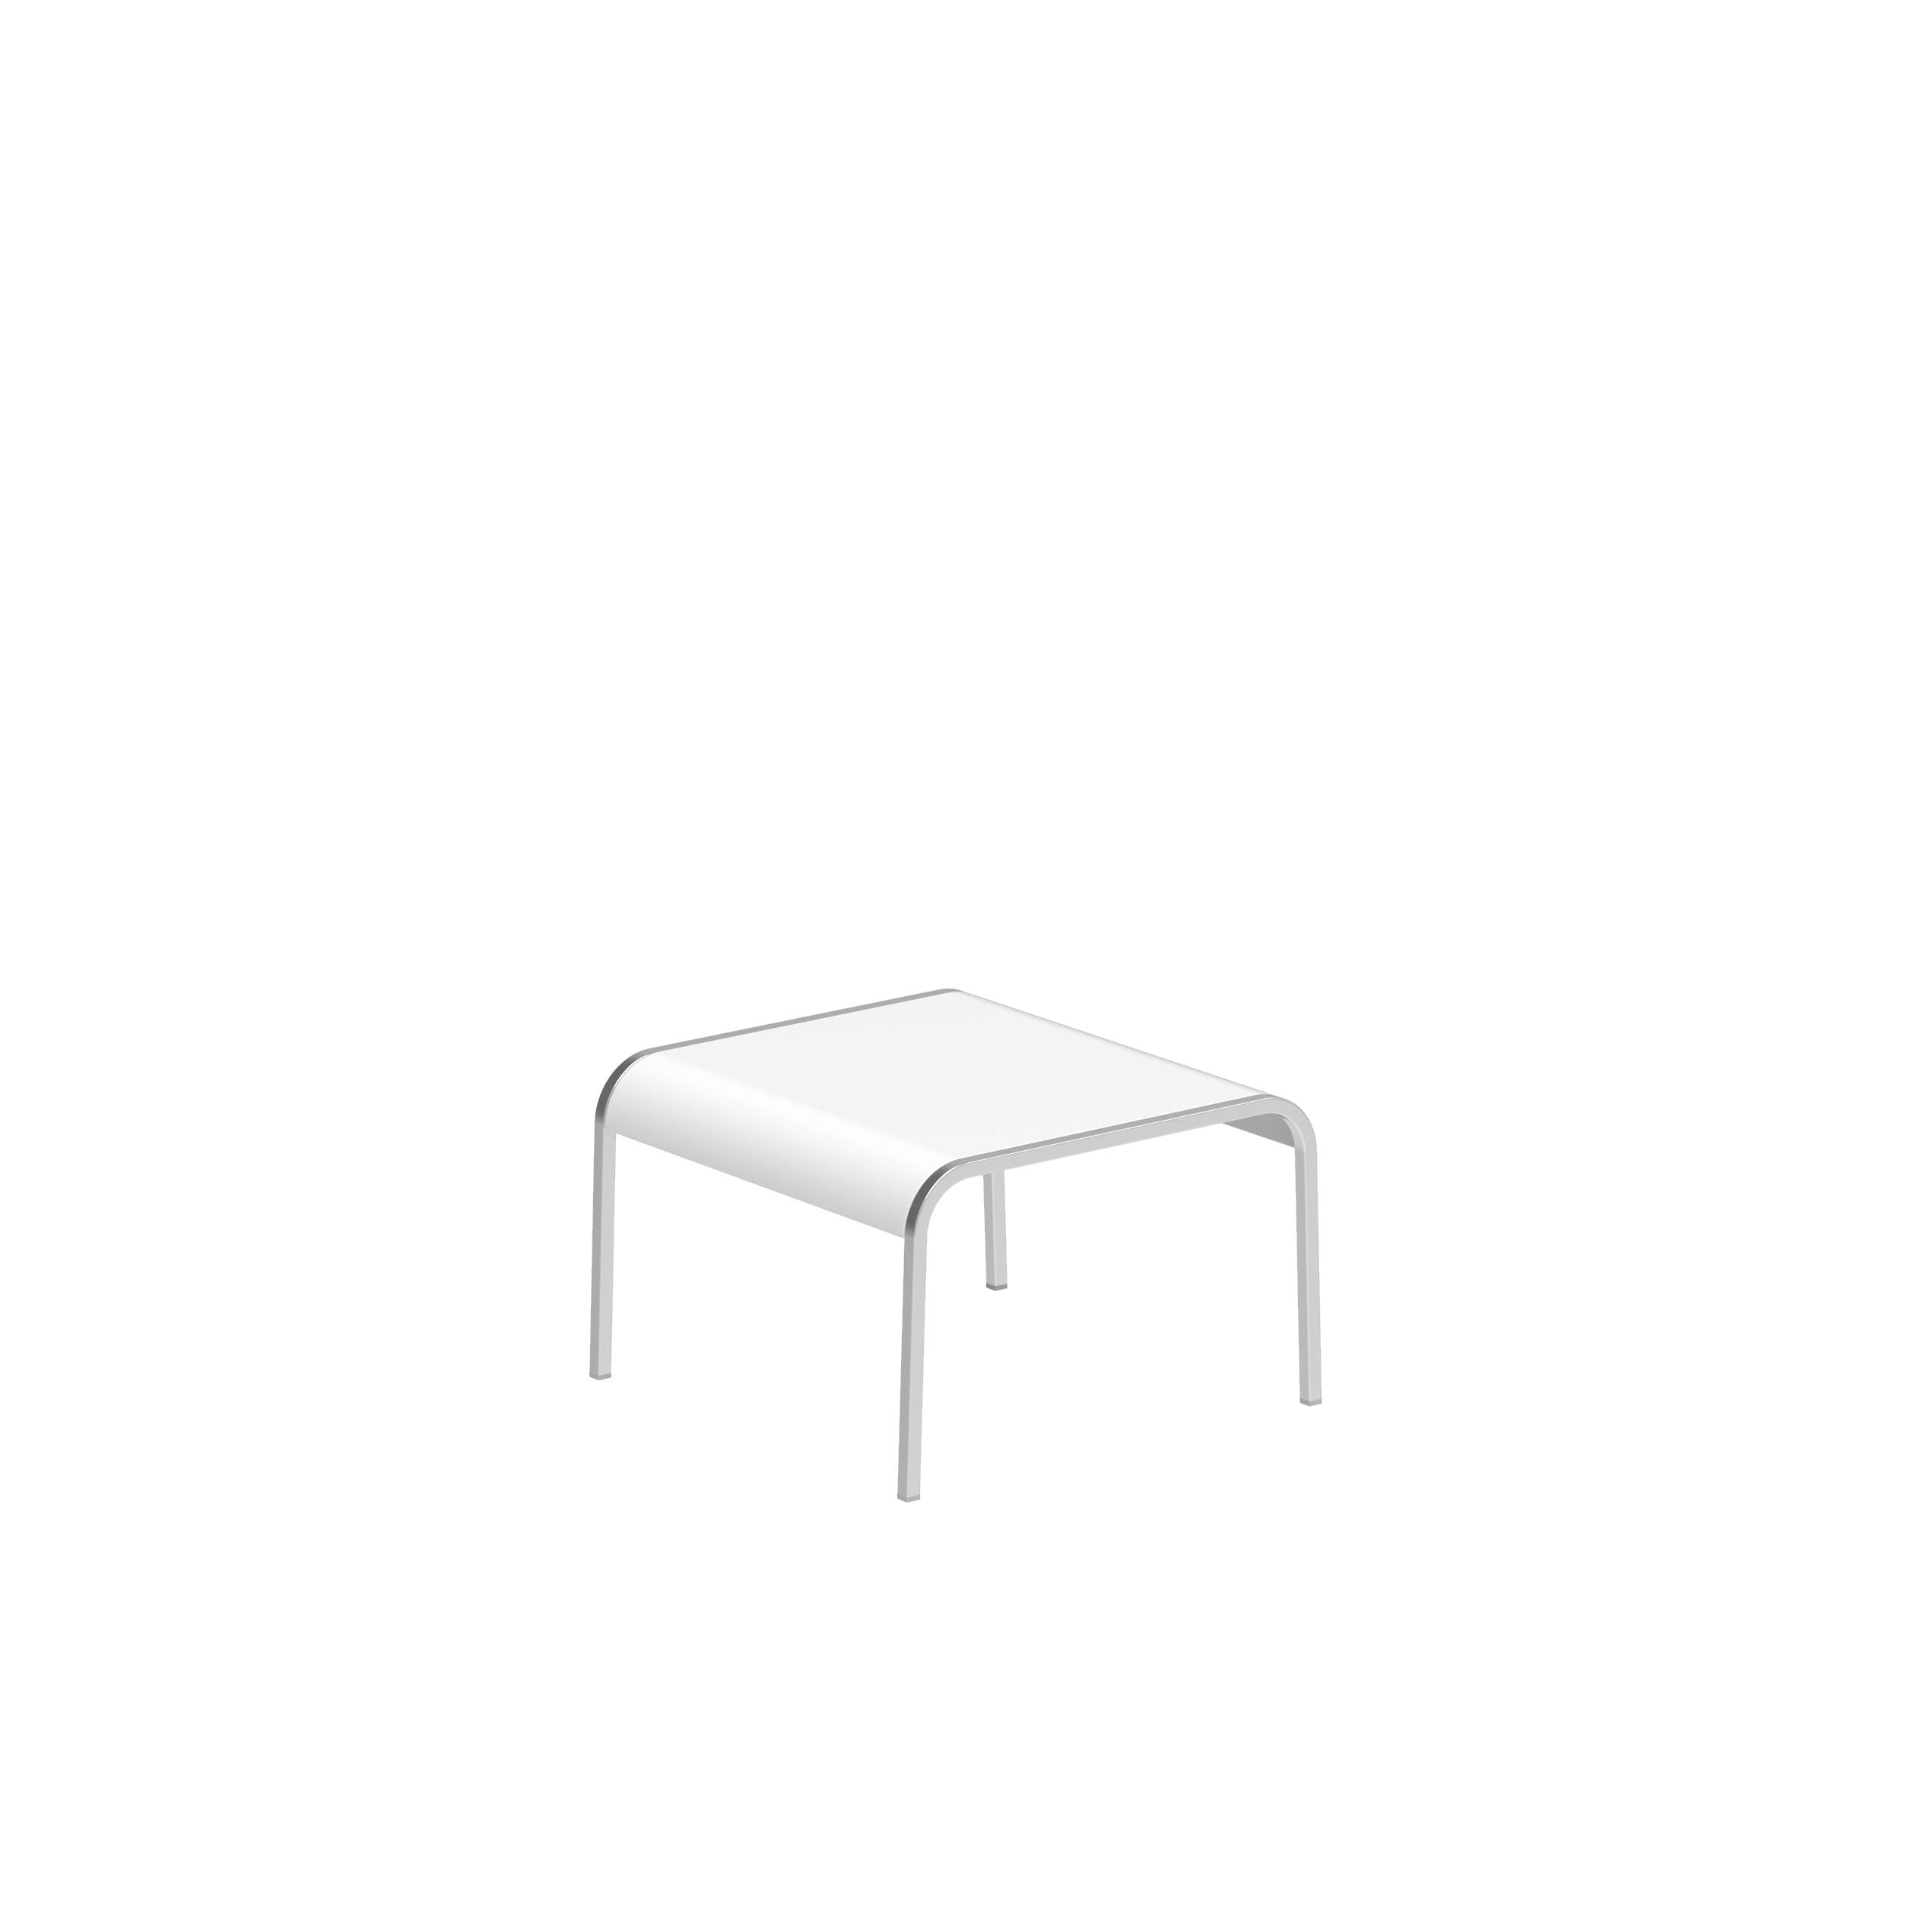 Qt50 Side Table 50x50cm With Alu Top White El Pol